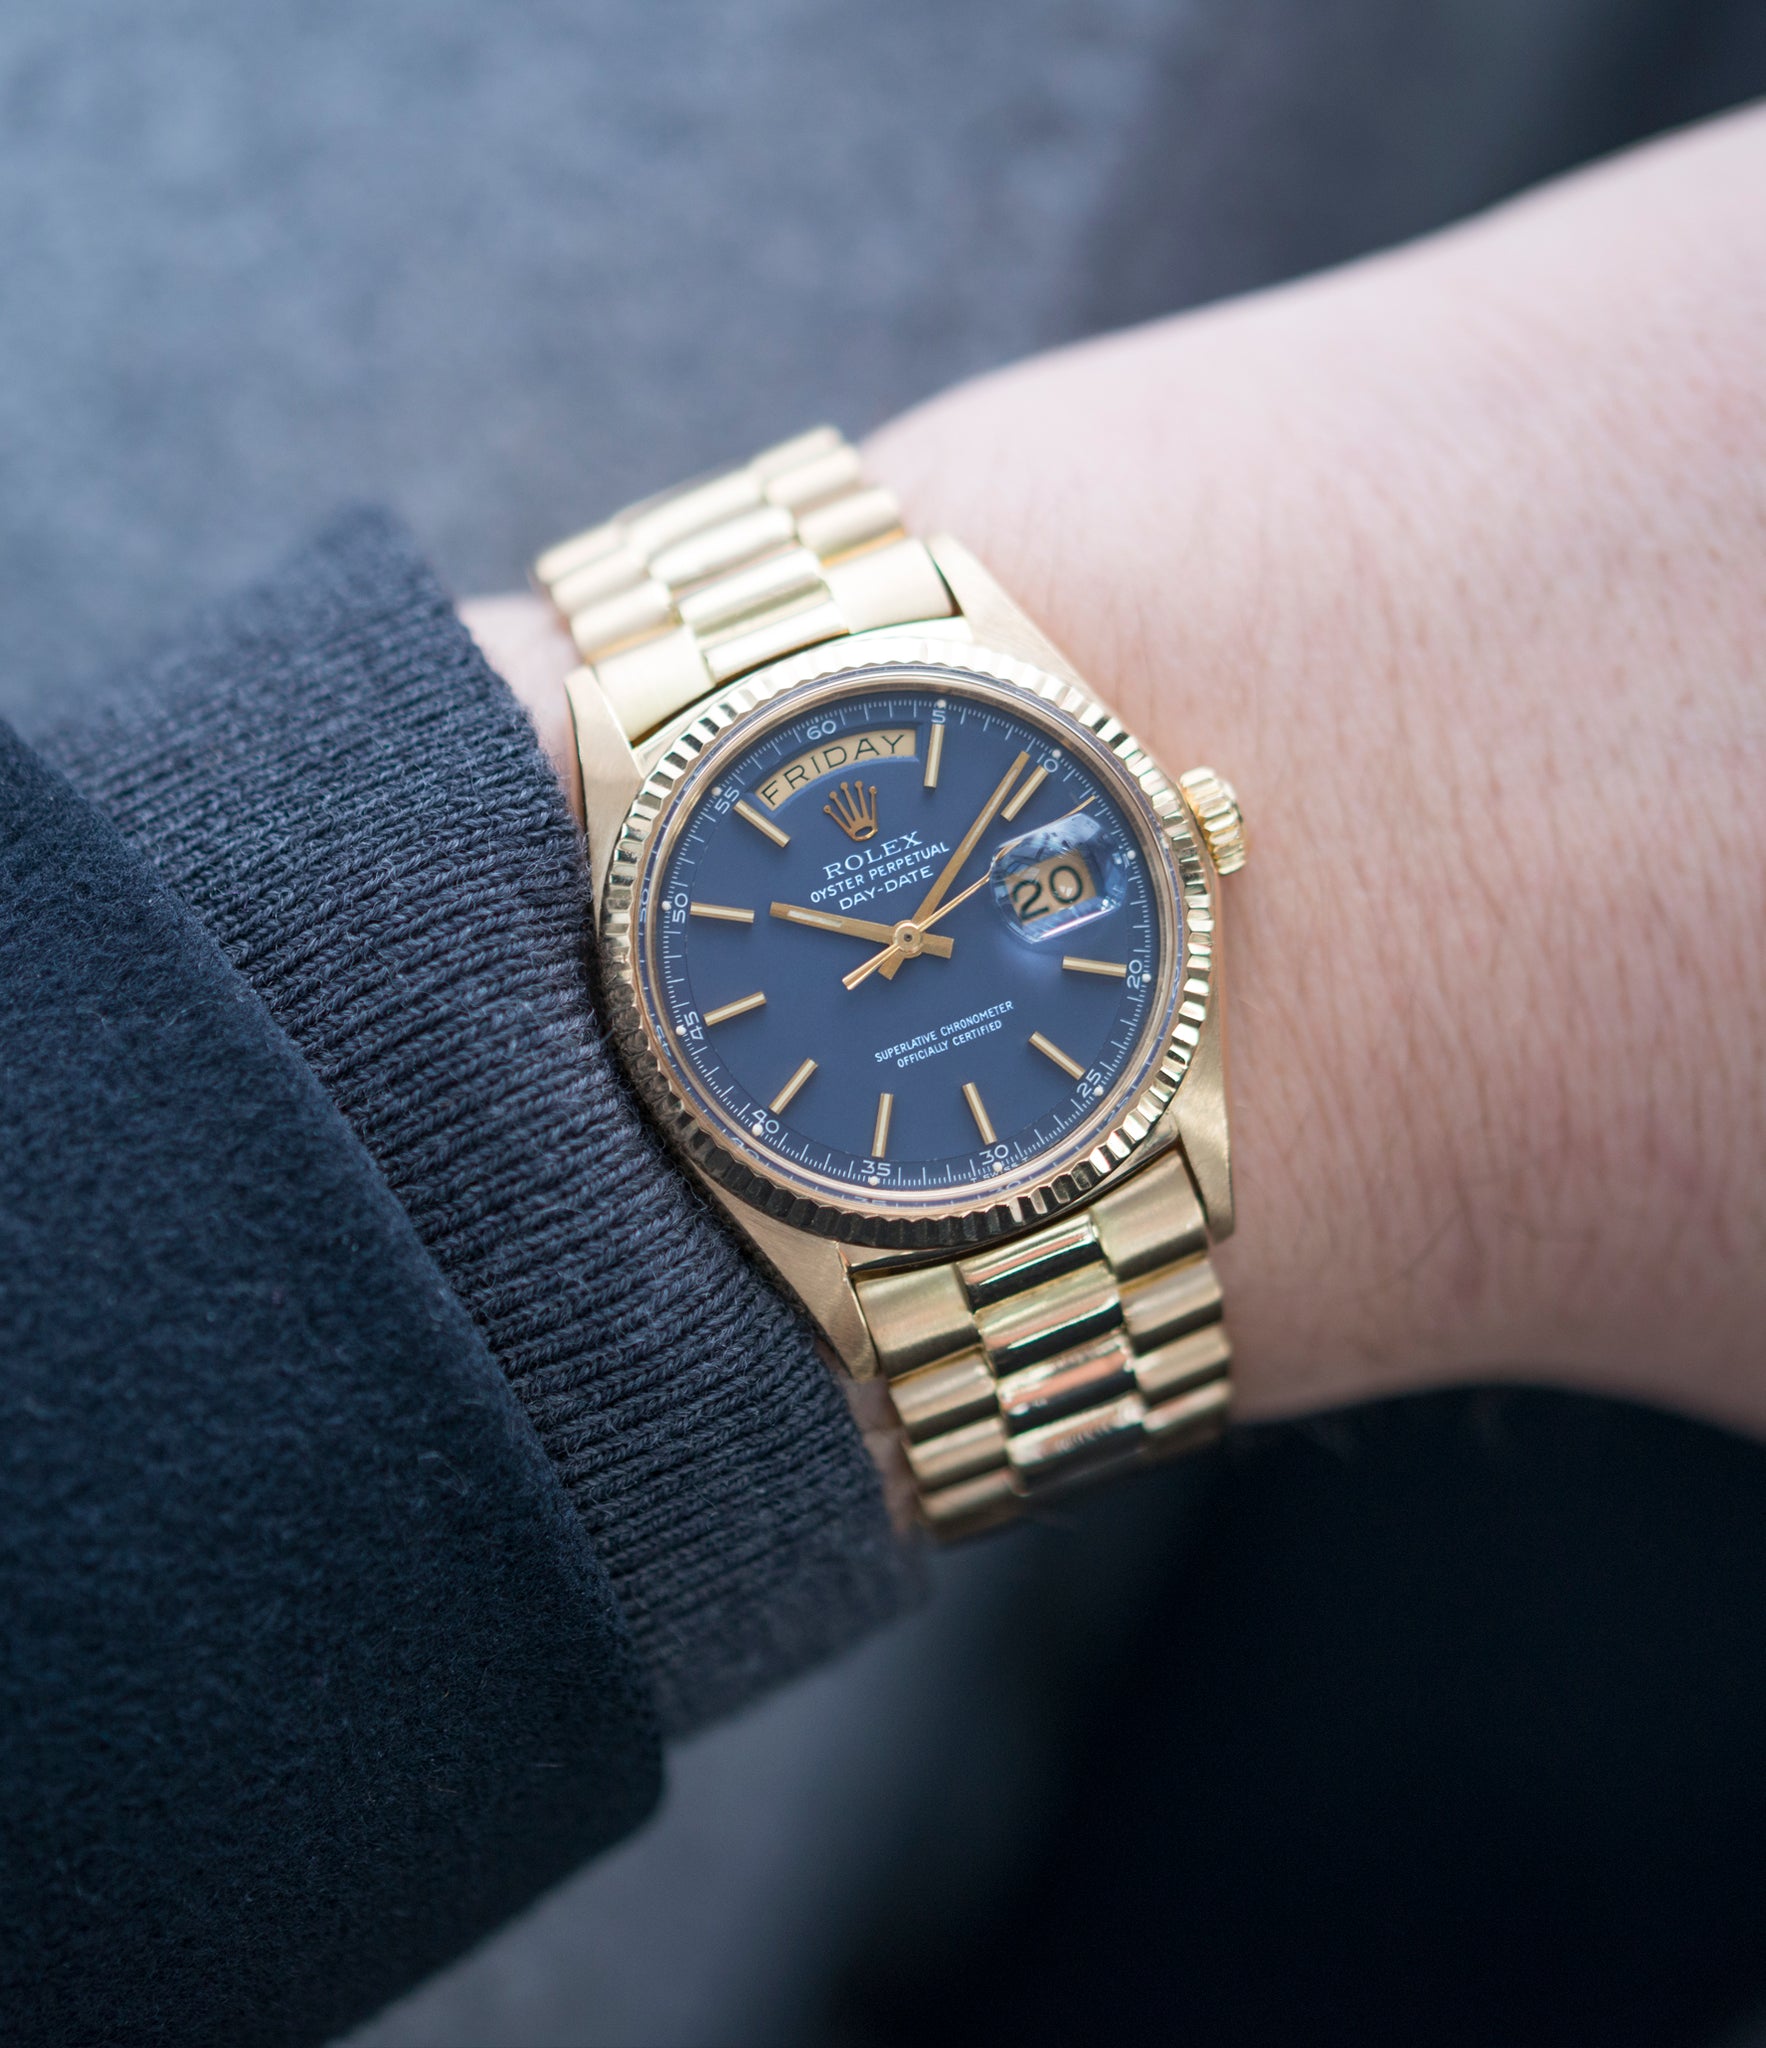 on the wrist vintage Rolex Day-Date 1803 Oyster Perpetual Cal. 1556 gold watch blue dial for sale online at A Collected Man London UK specialist of rare watches